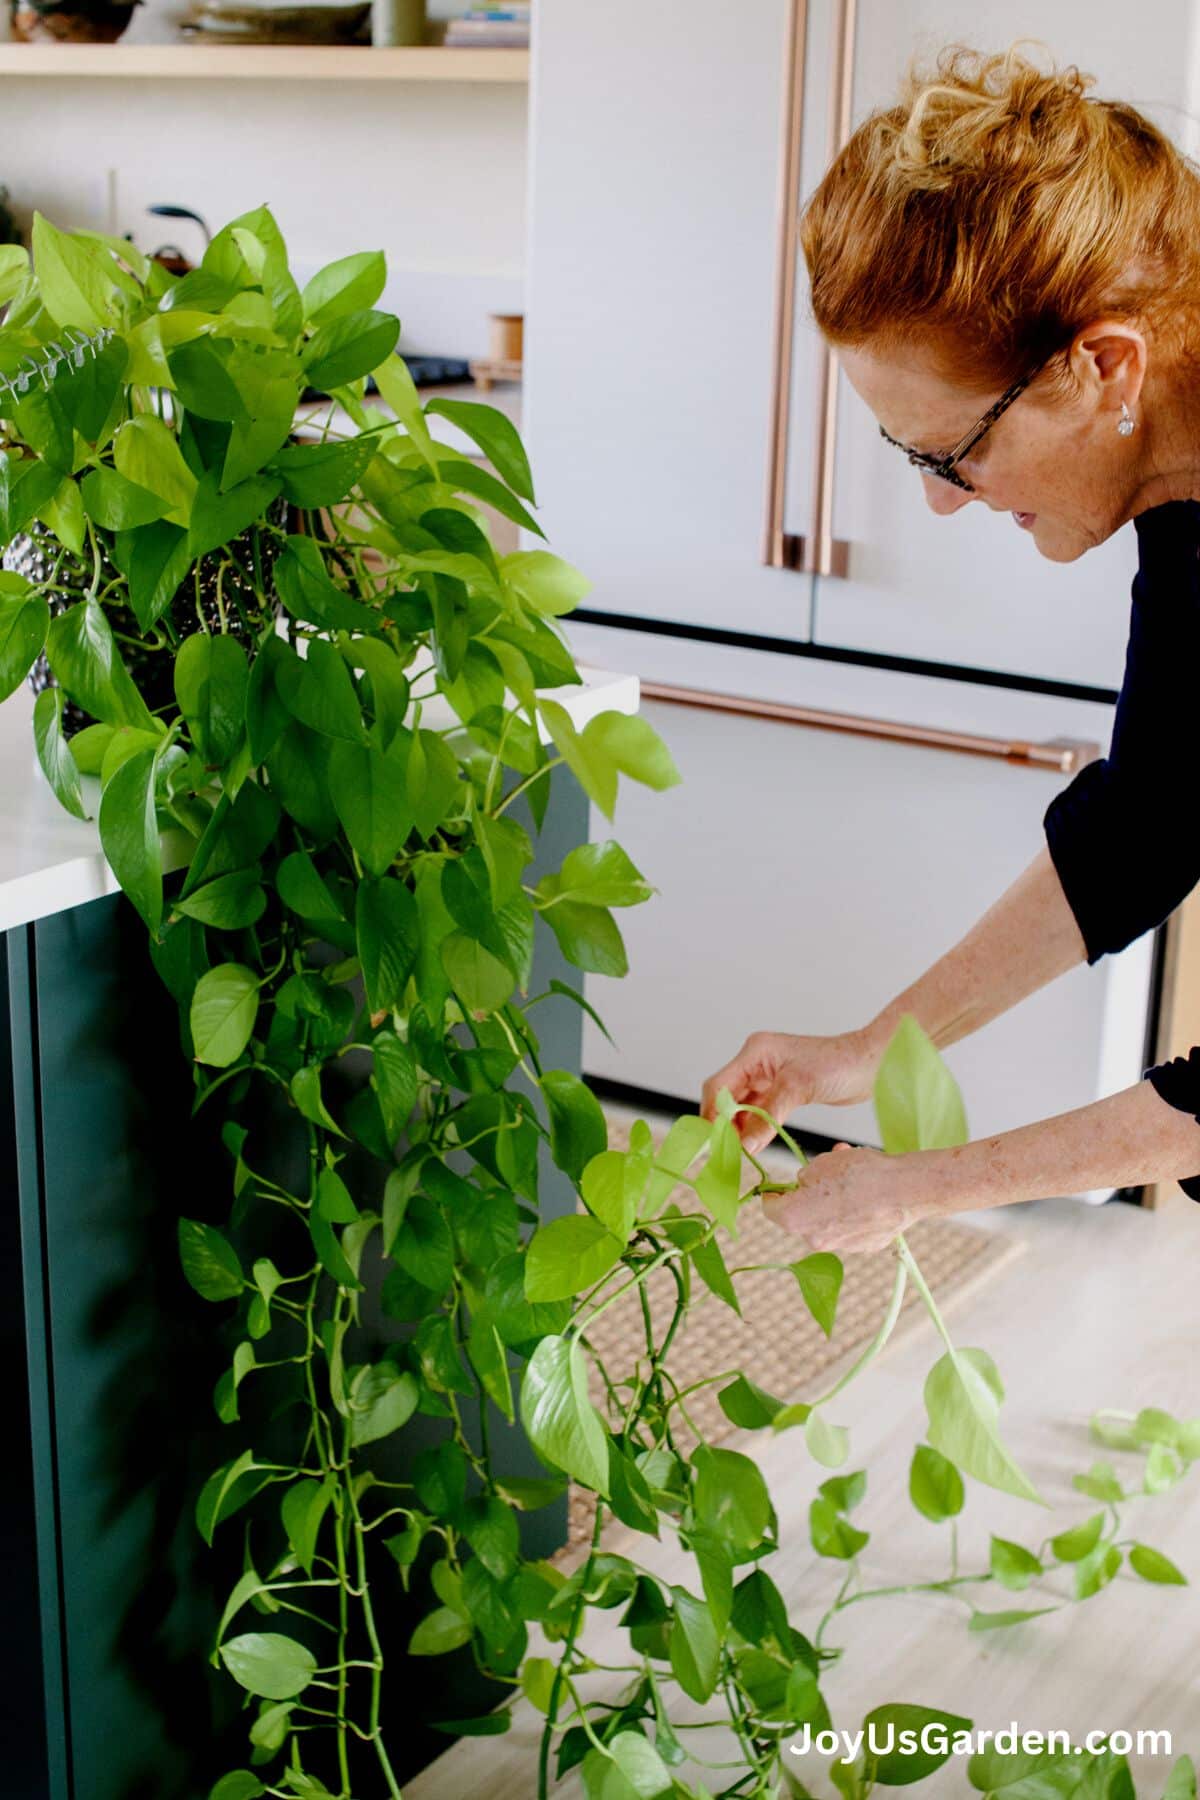 nell foster handling the trails of a neon pothos in a bright kitchen